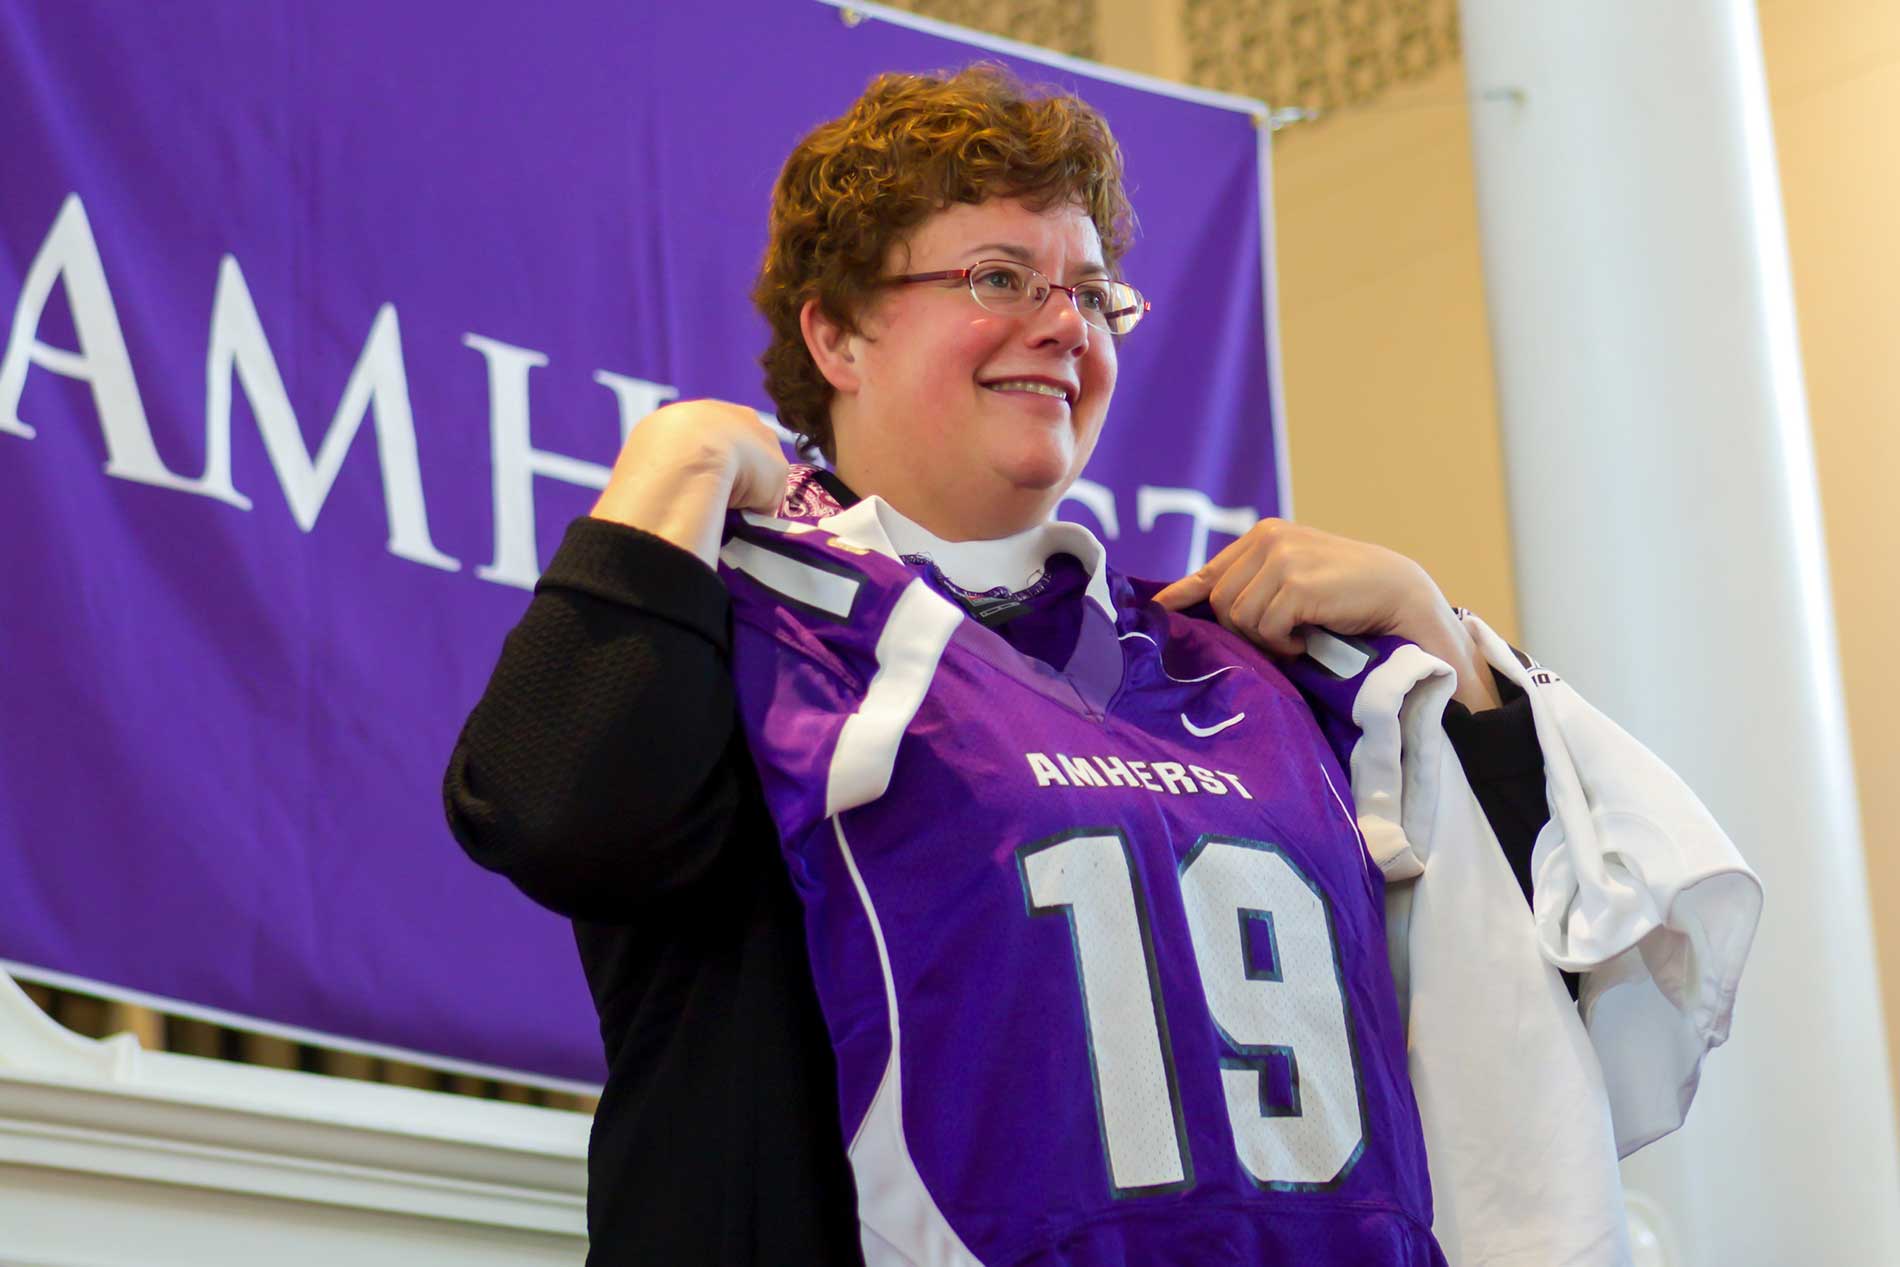 President Martin hold a number 19 jersey, gifted to her at her inauguration.